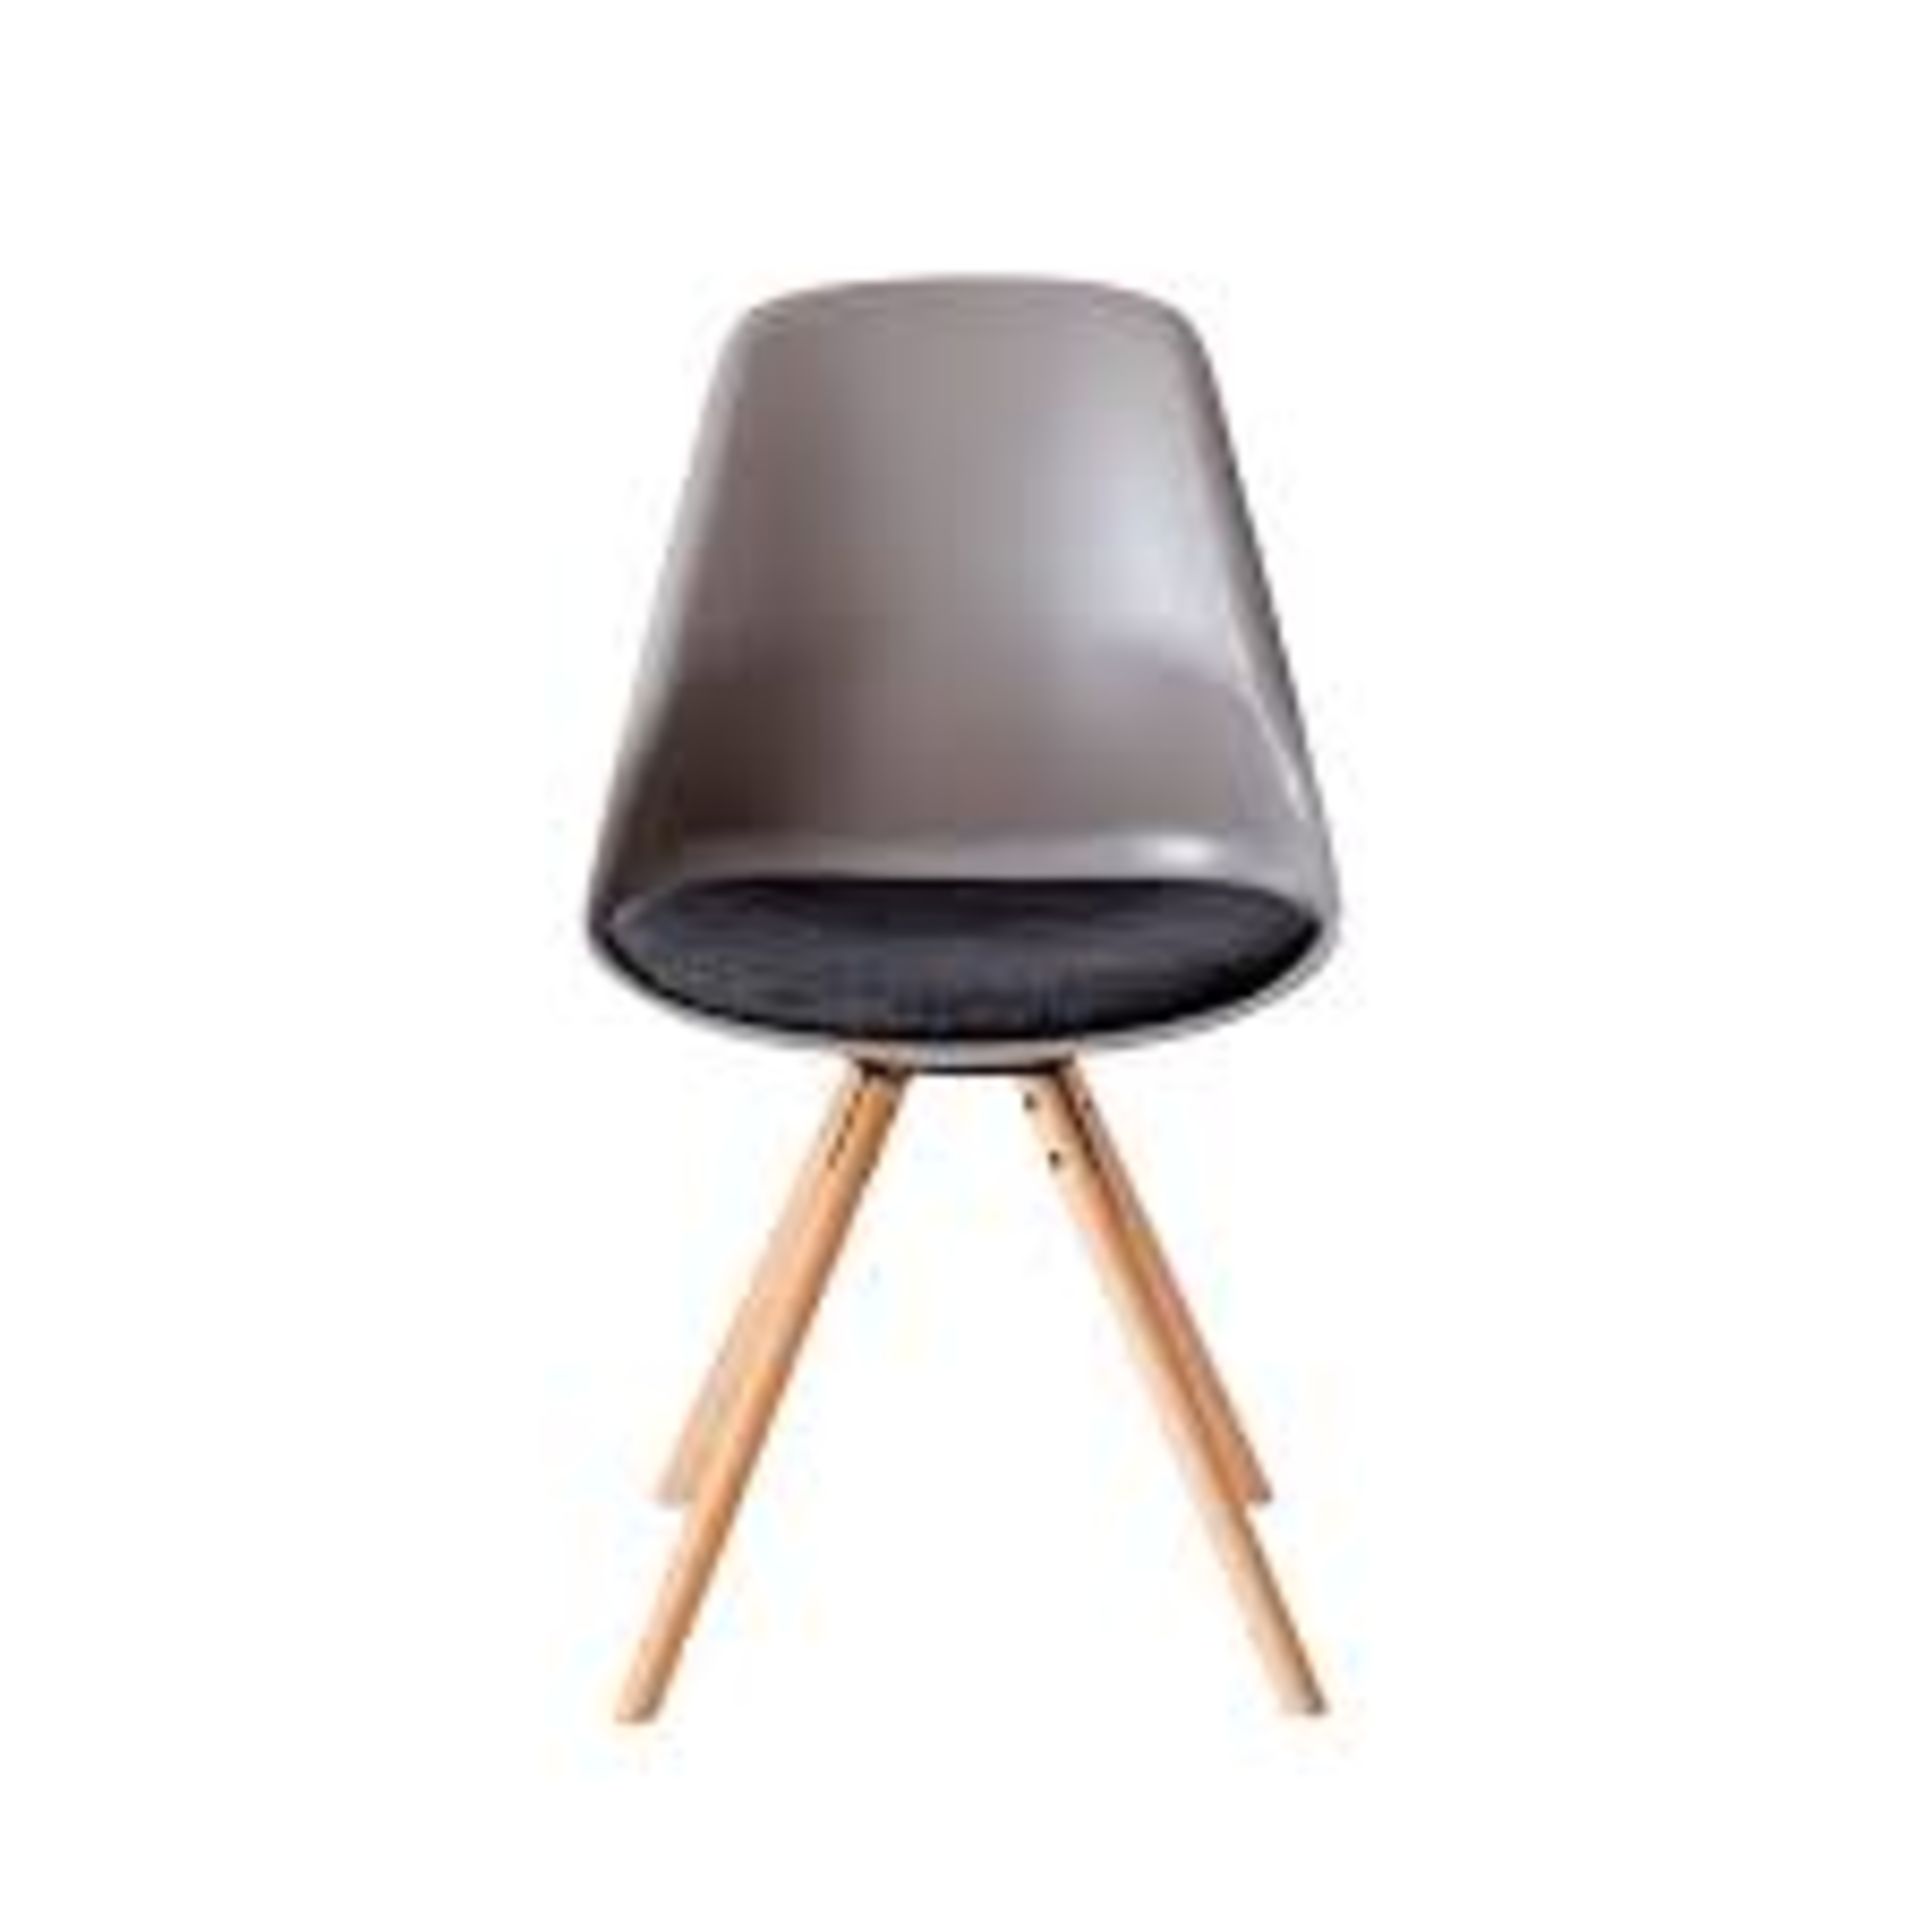 Set of 4 x 'TURNER' Contemporary Scandinavian-style Dining Chairs in Brown With Grey Seat Pads - Mid - Image 2 of 4